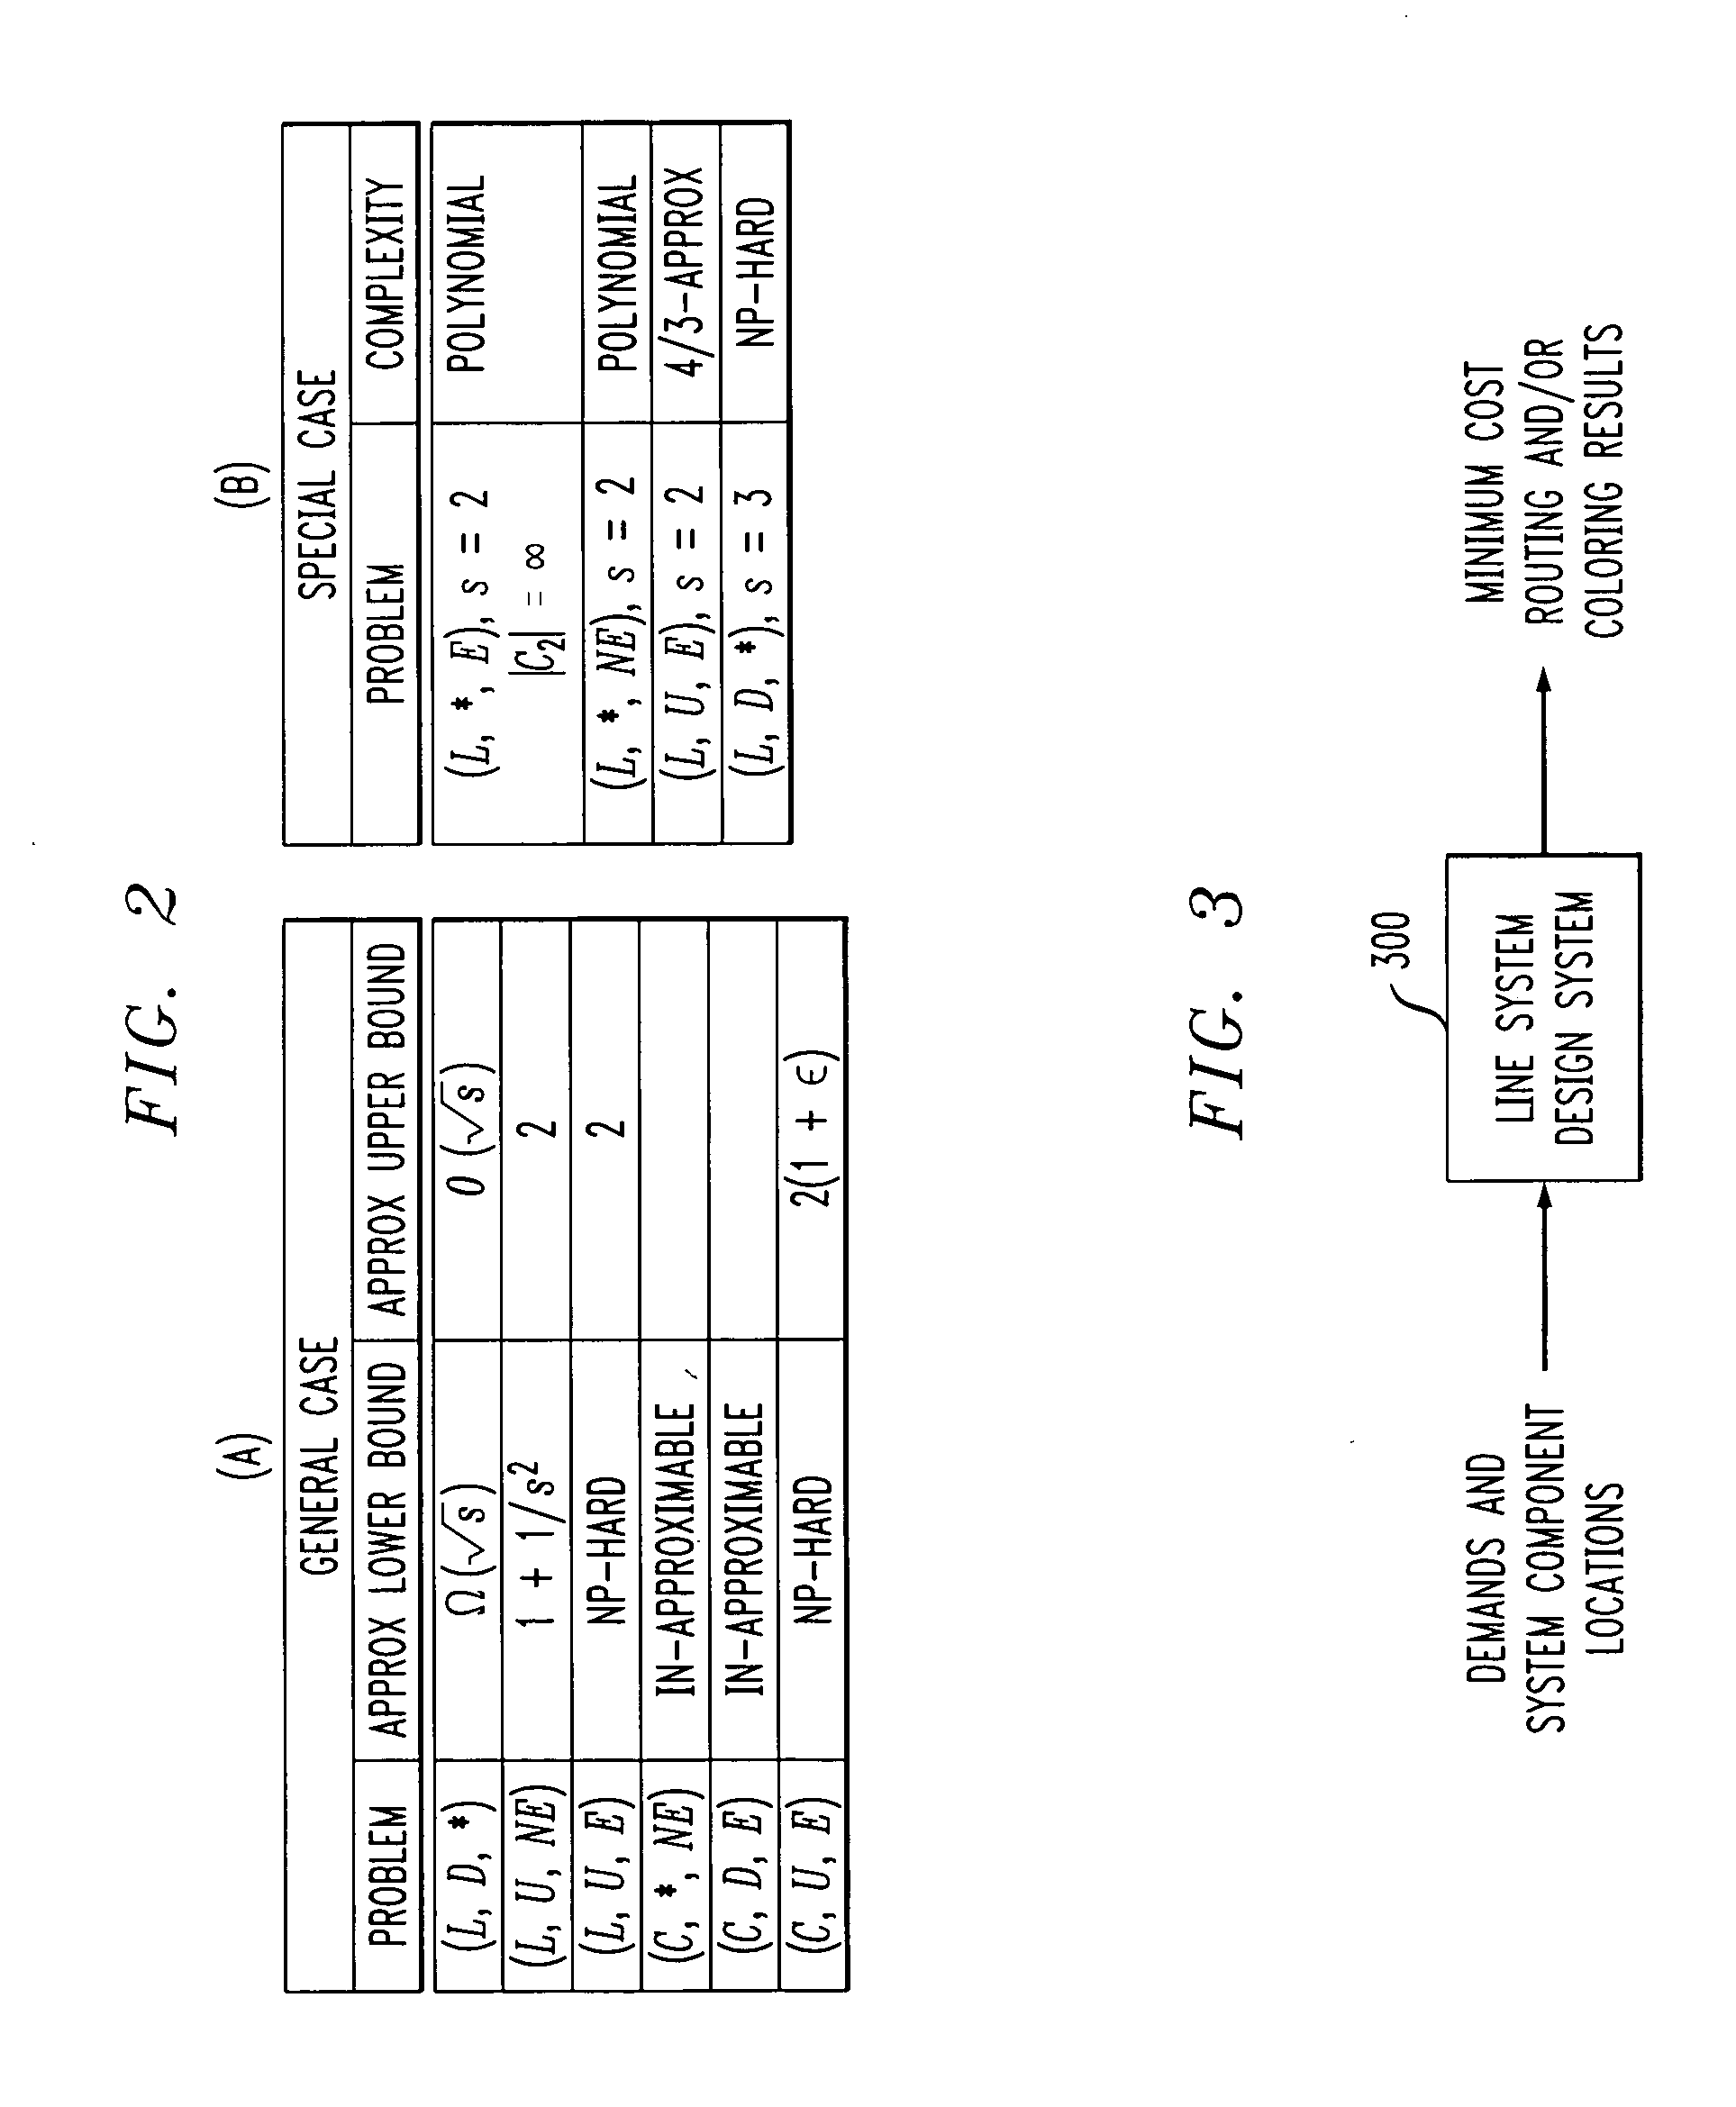 Methods and apparatus for line system design